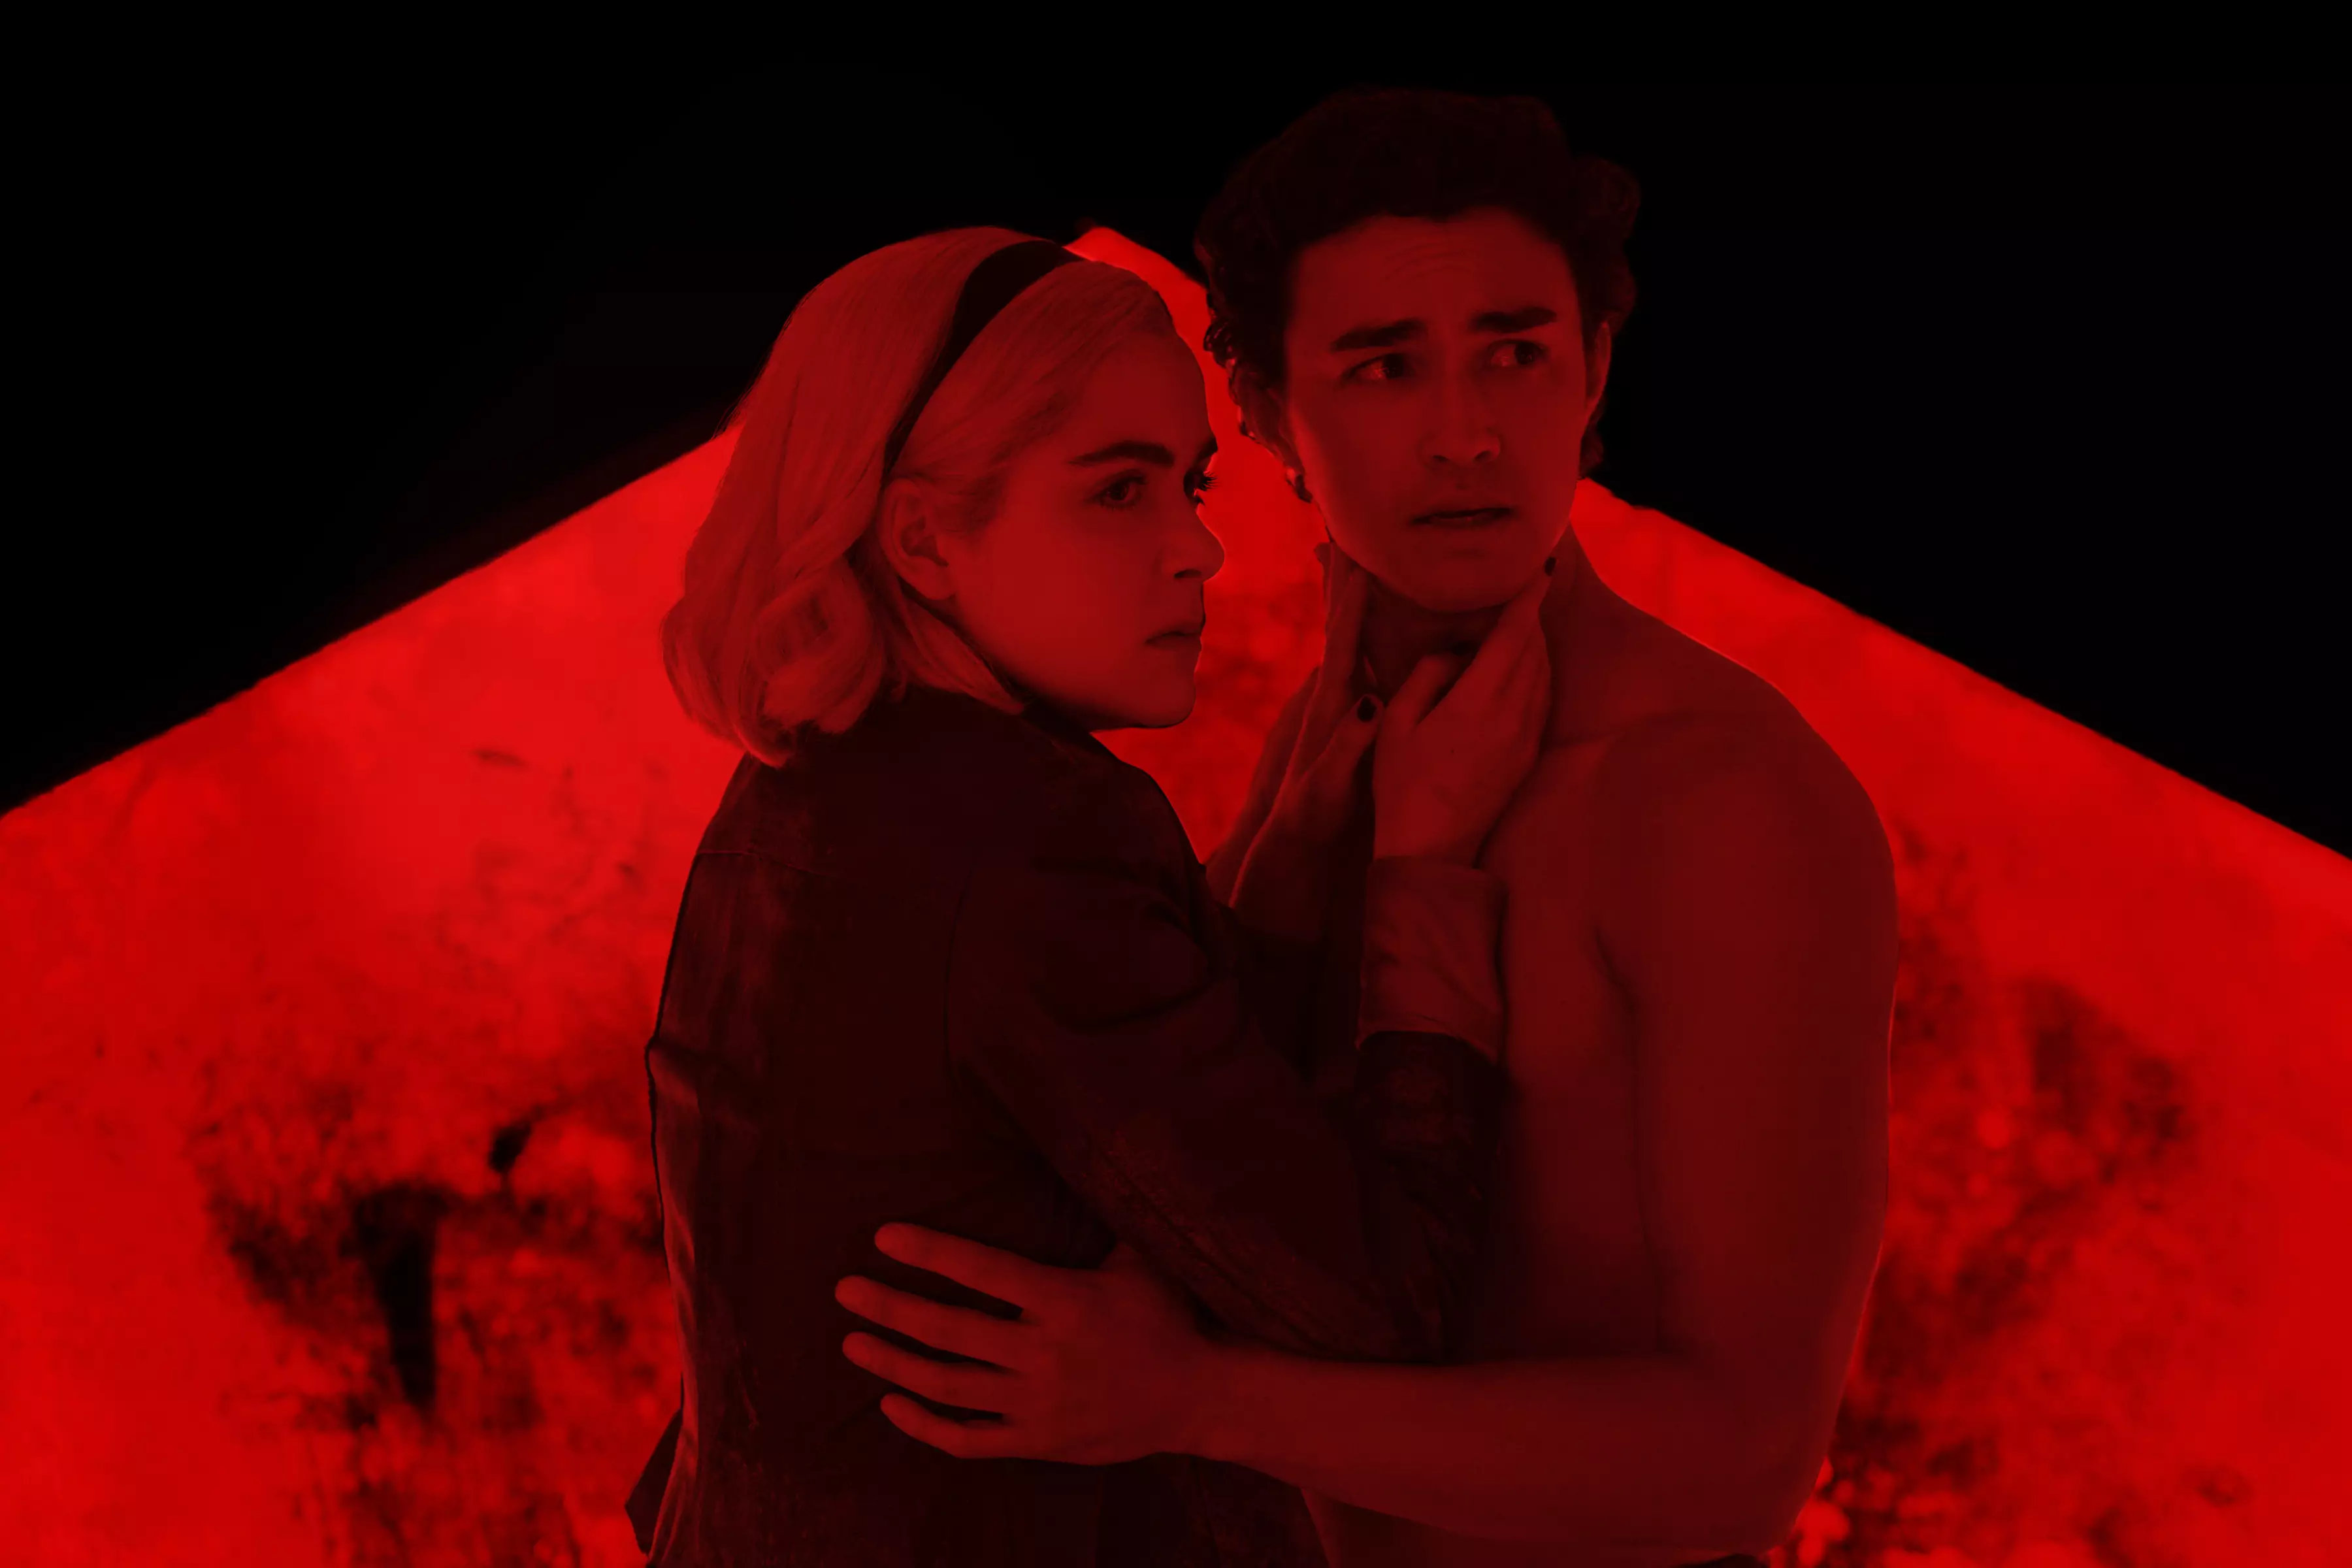 Will Sabrina and Nick ever make it work? We're rooting for bad boy Caliban to be honest (